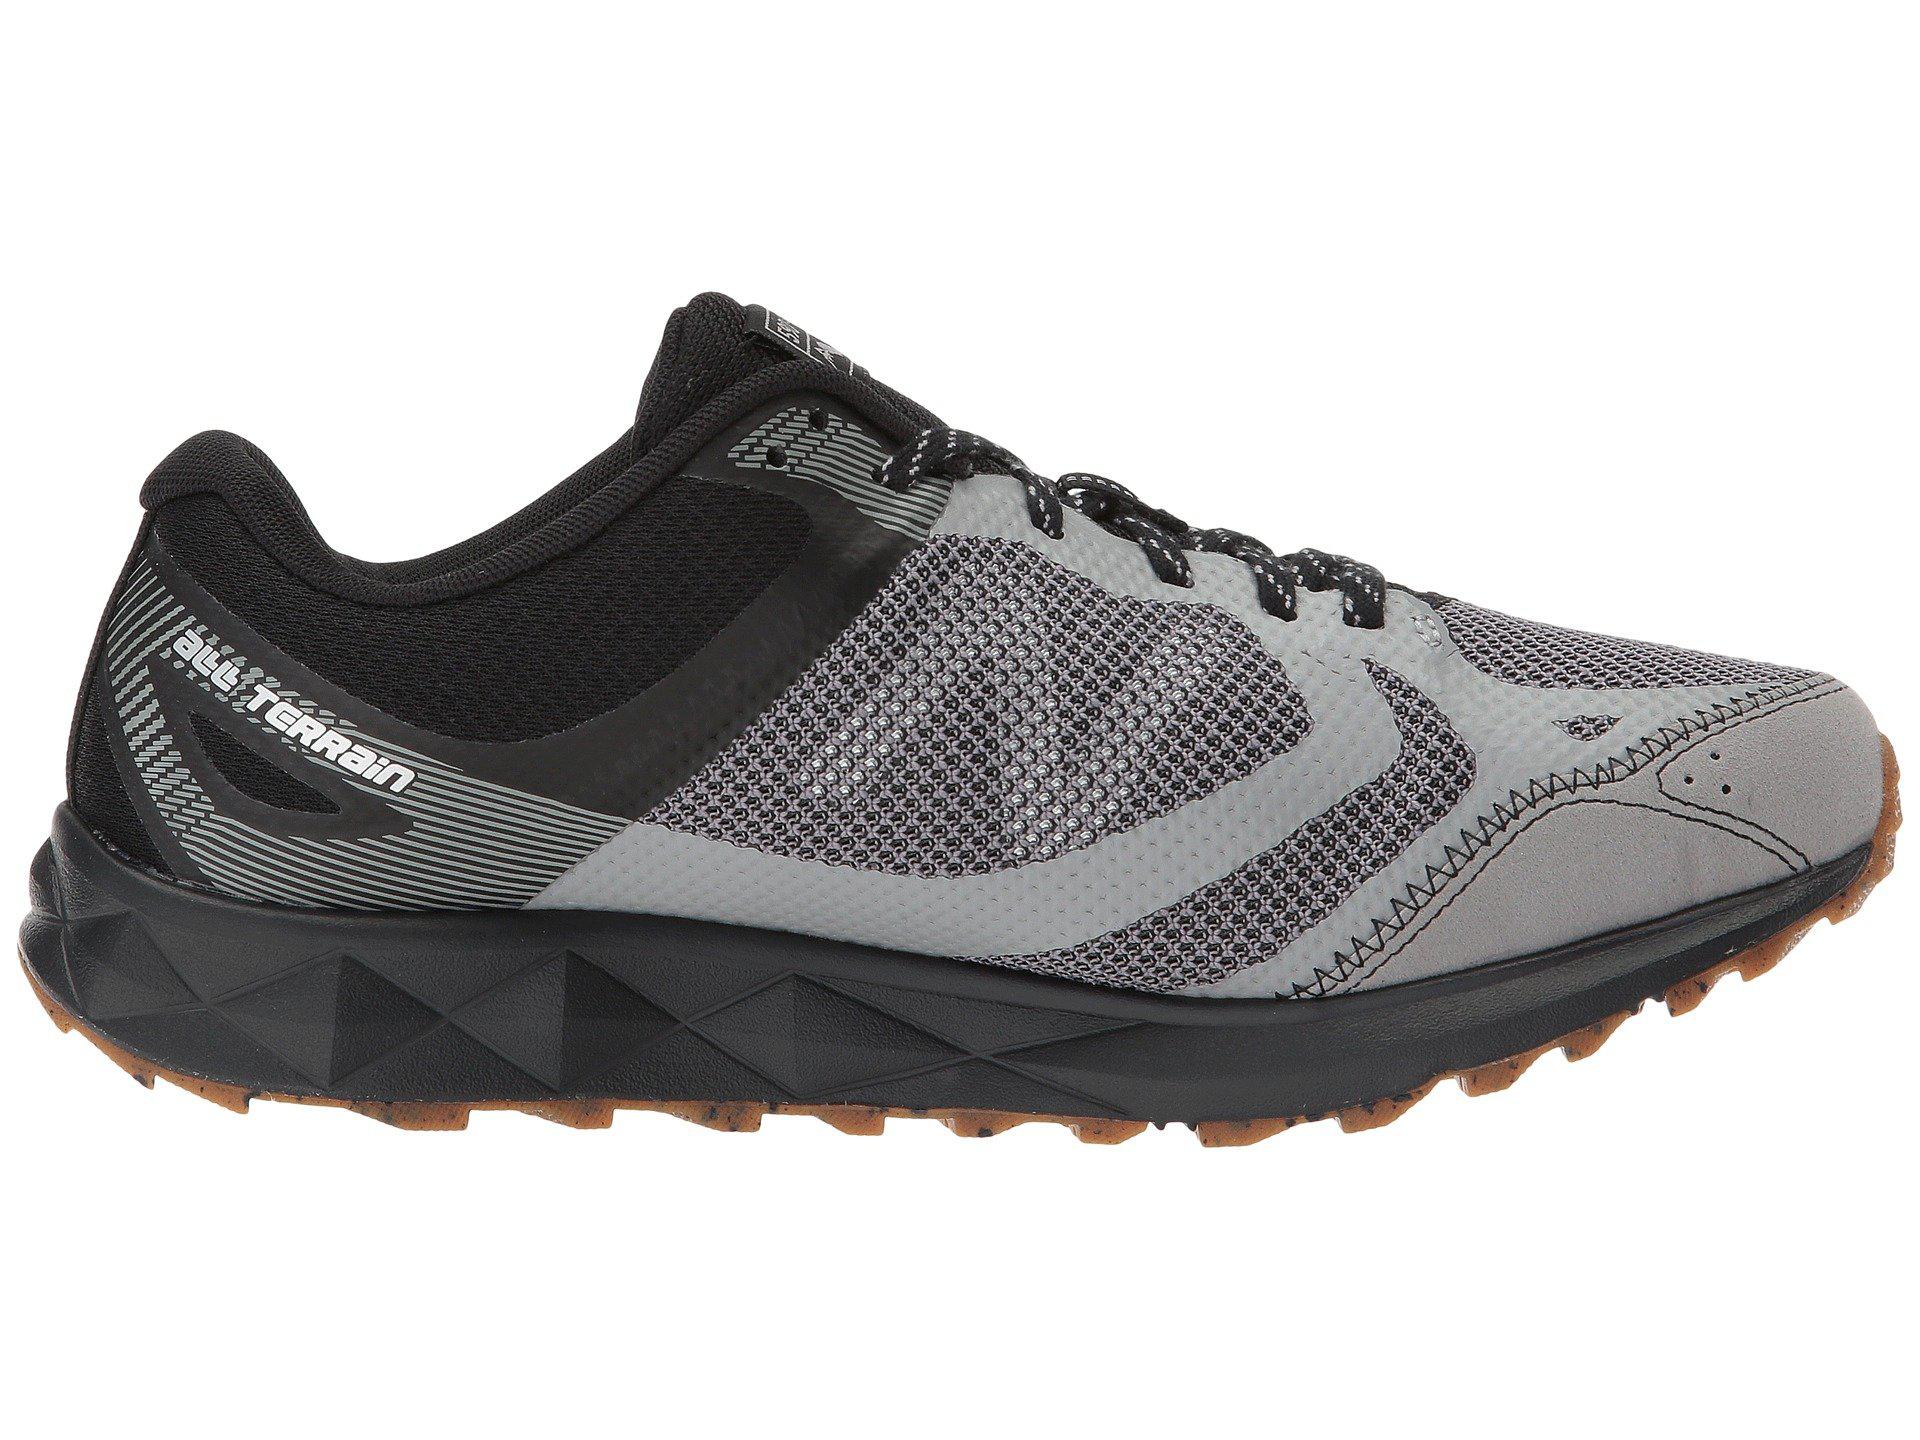 New Balance Synthetic 590v2 Trail Running Shoes in Gray for Men - Lyst